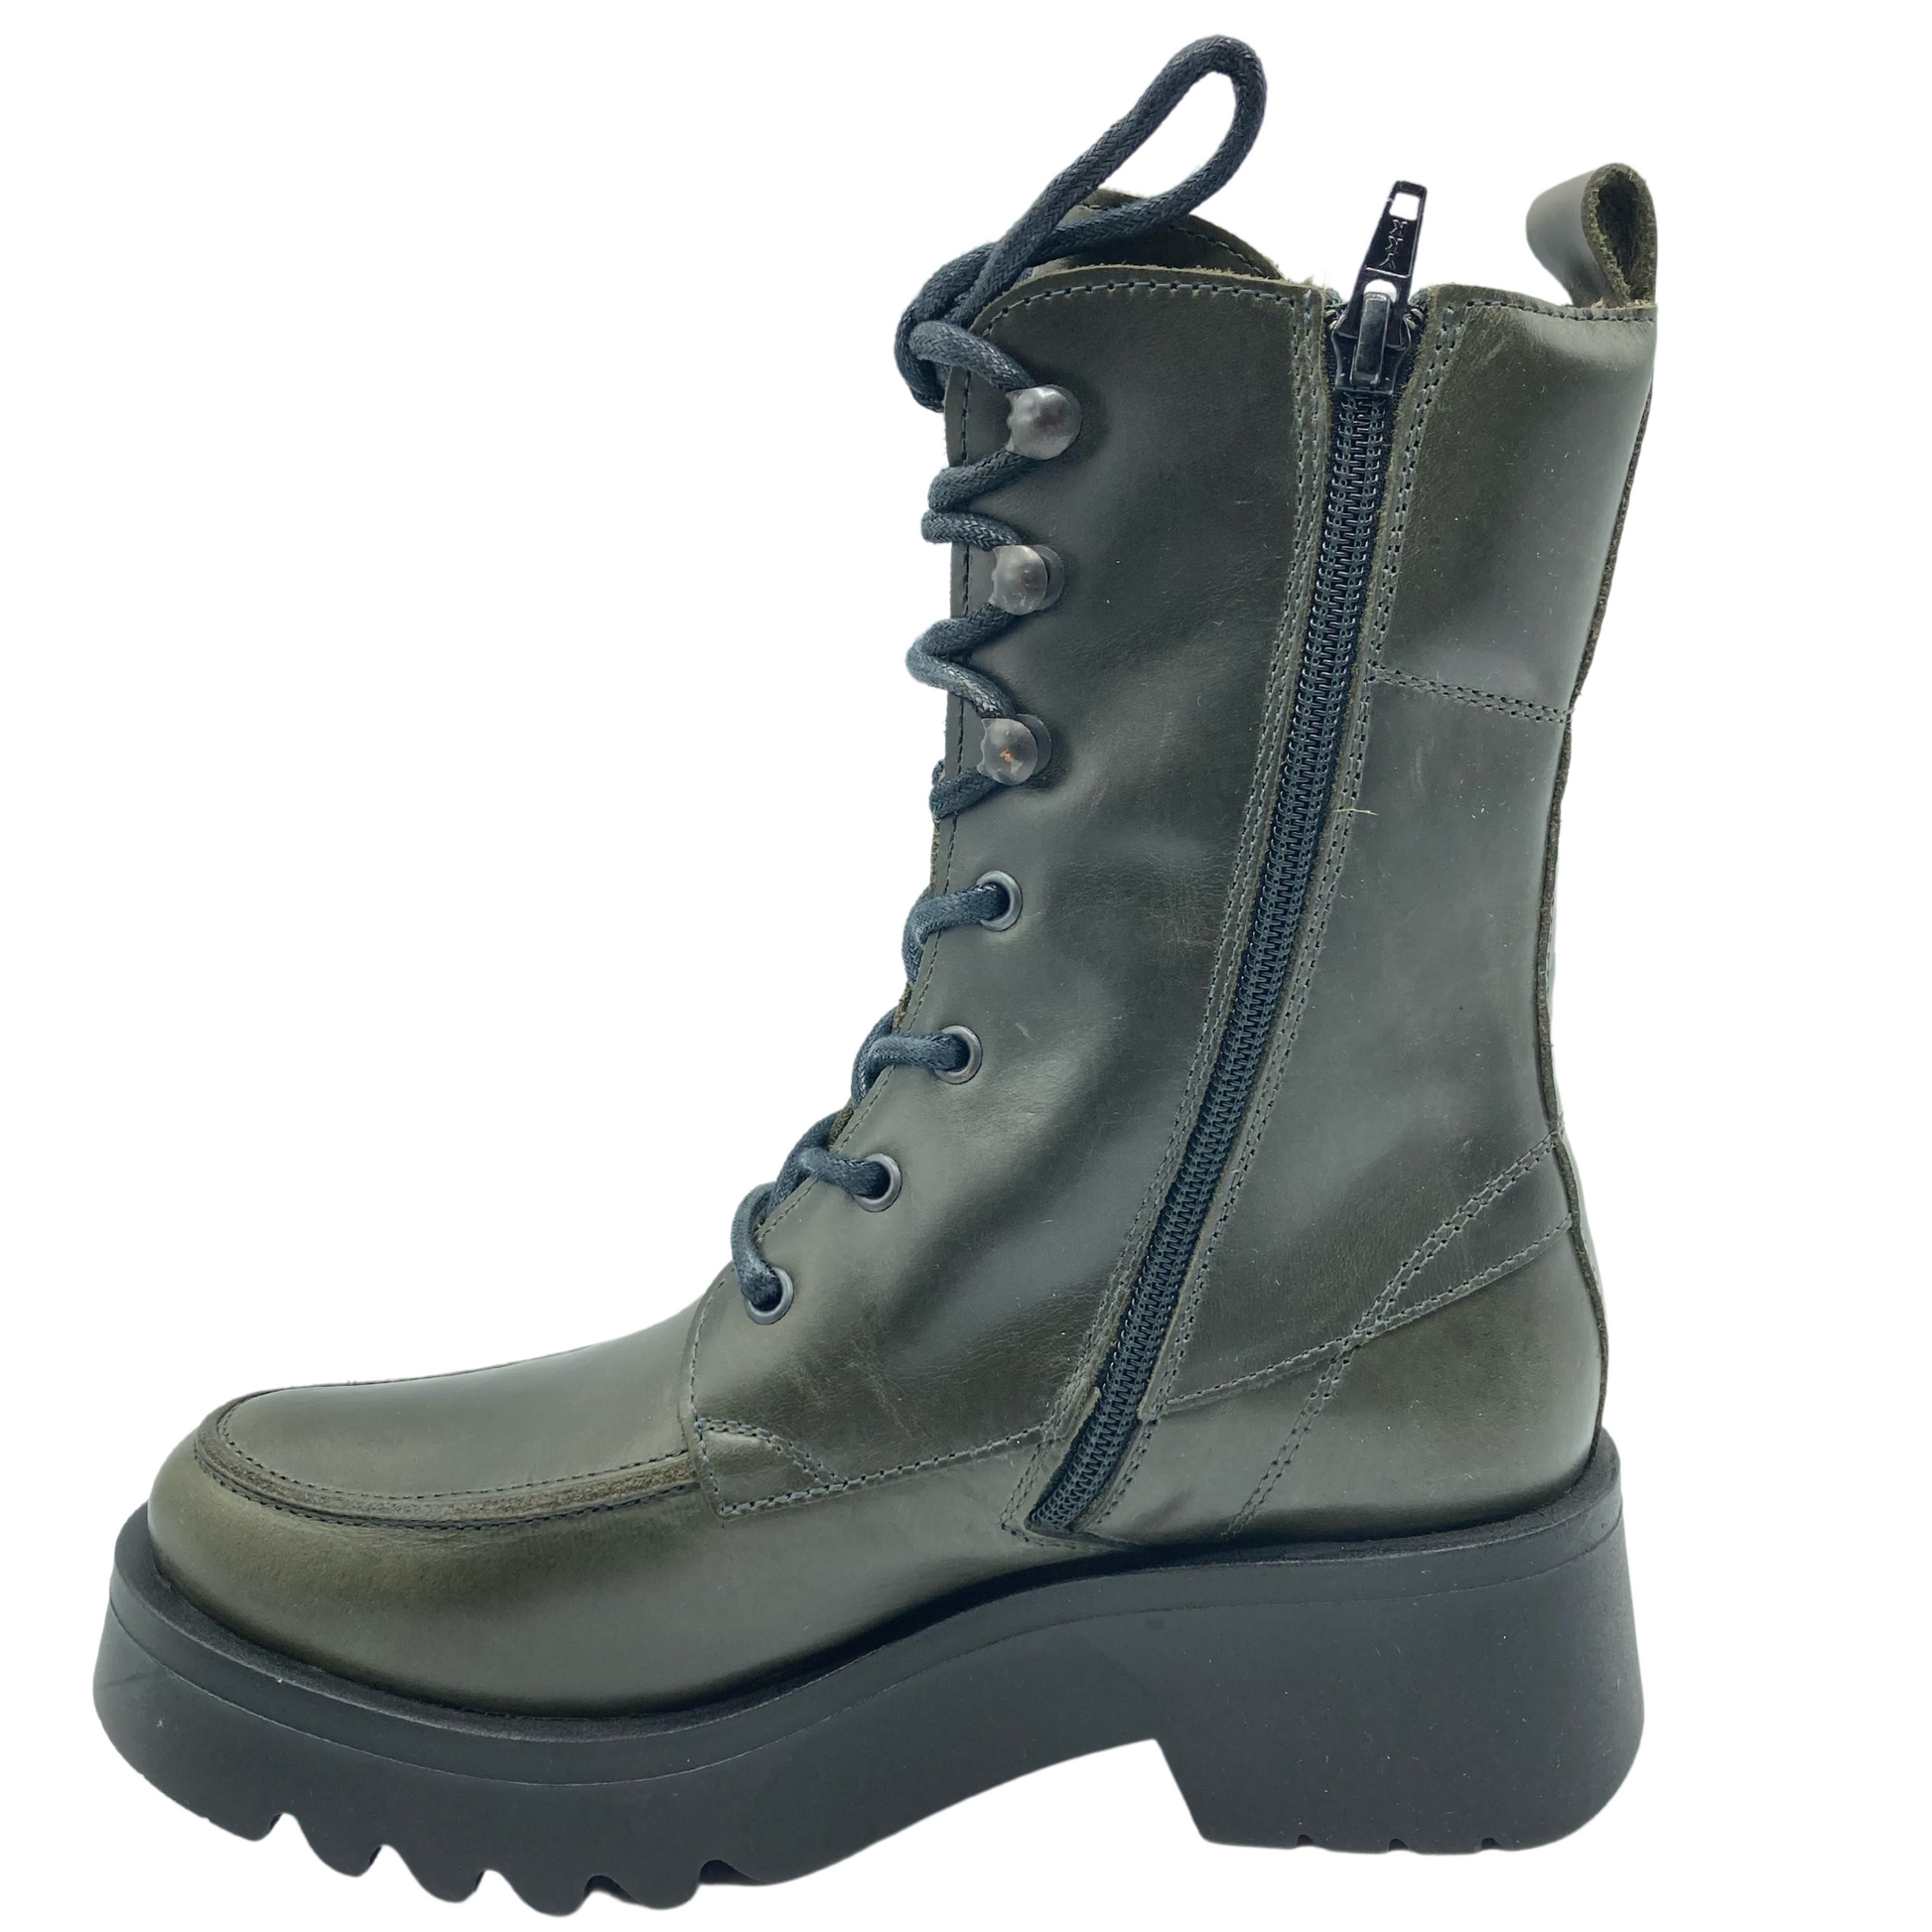 Left facing view of calf height green leather boot with black zipper. Black rubber sole with platform and chunky heel.